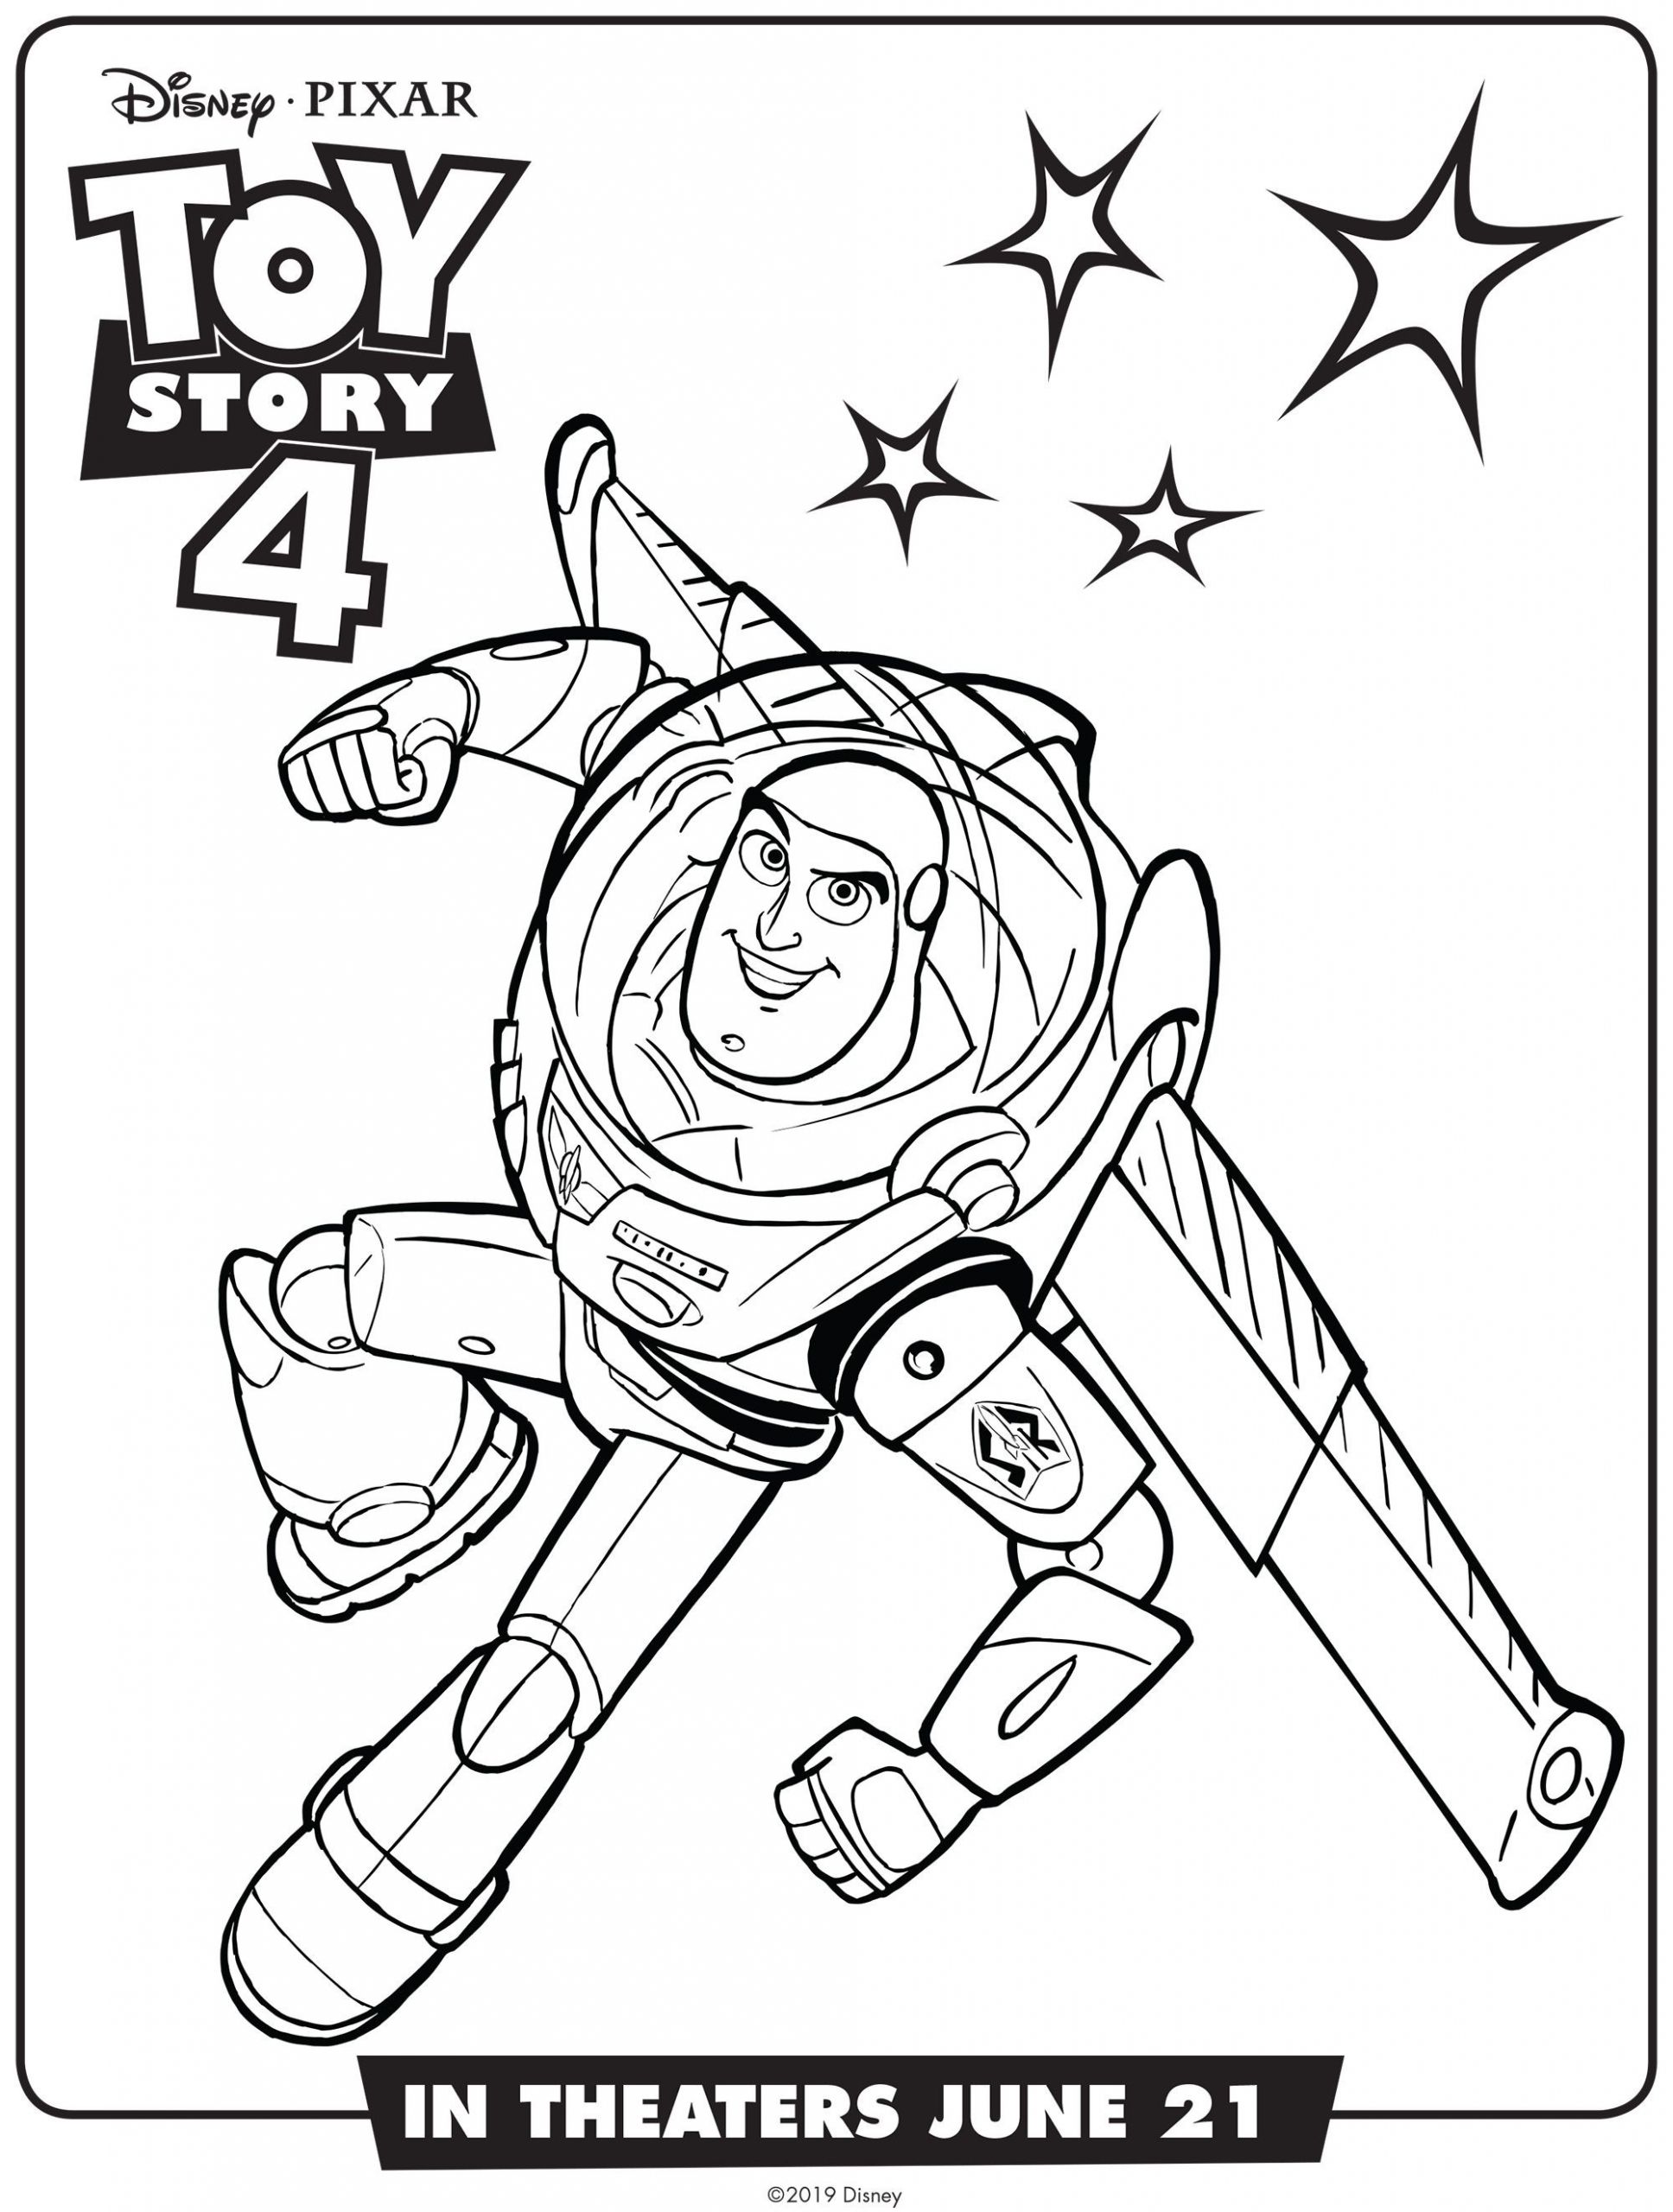 Coloring Websites For Kids
 Buzz Lightyear Toy Story 4 coloring page Disney Pixar